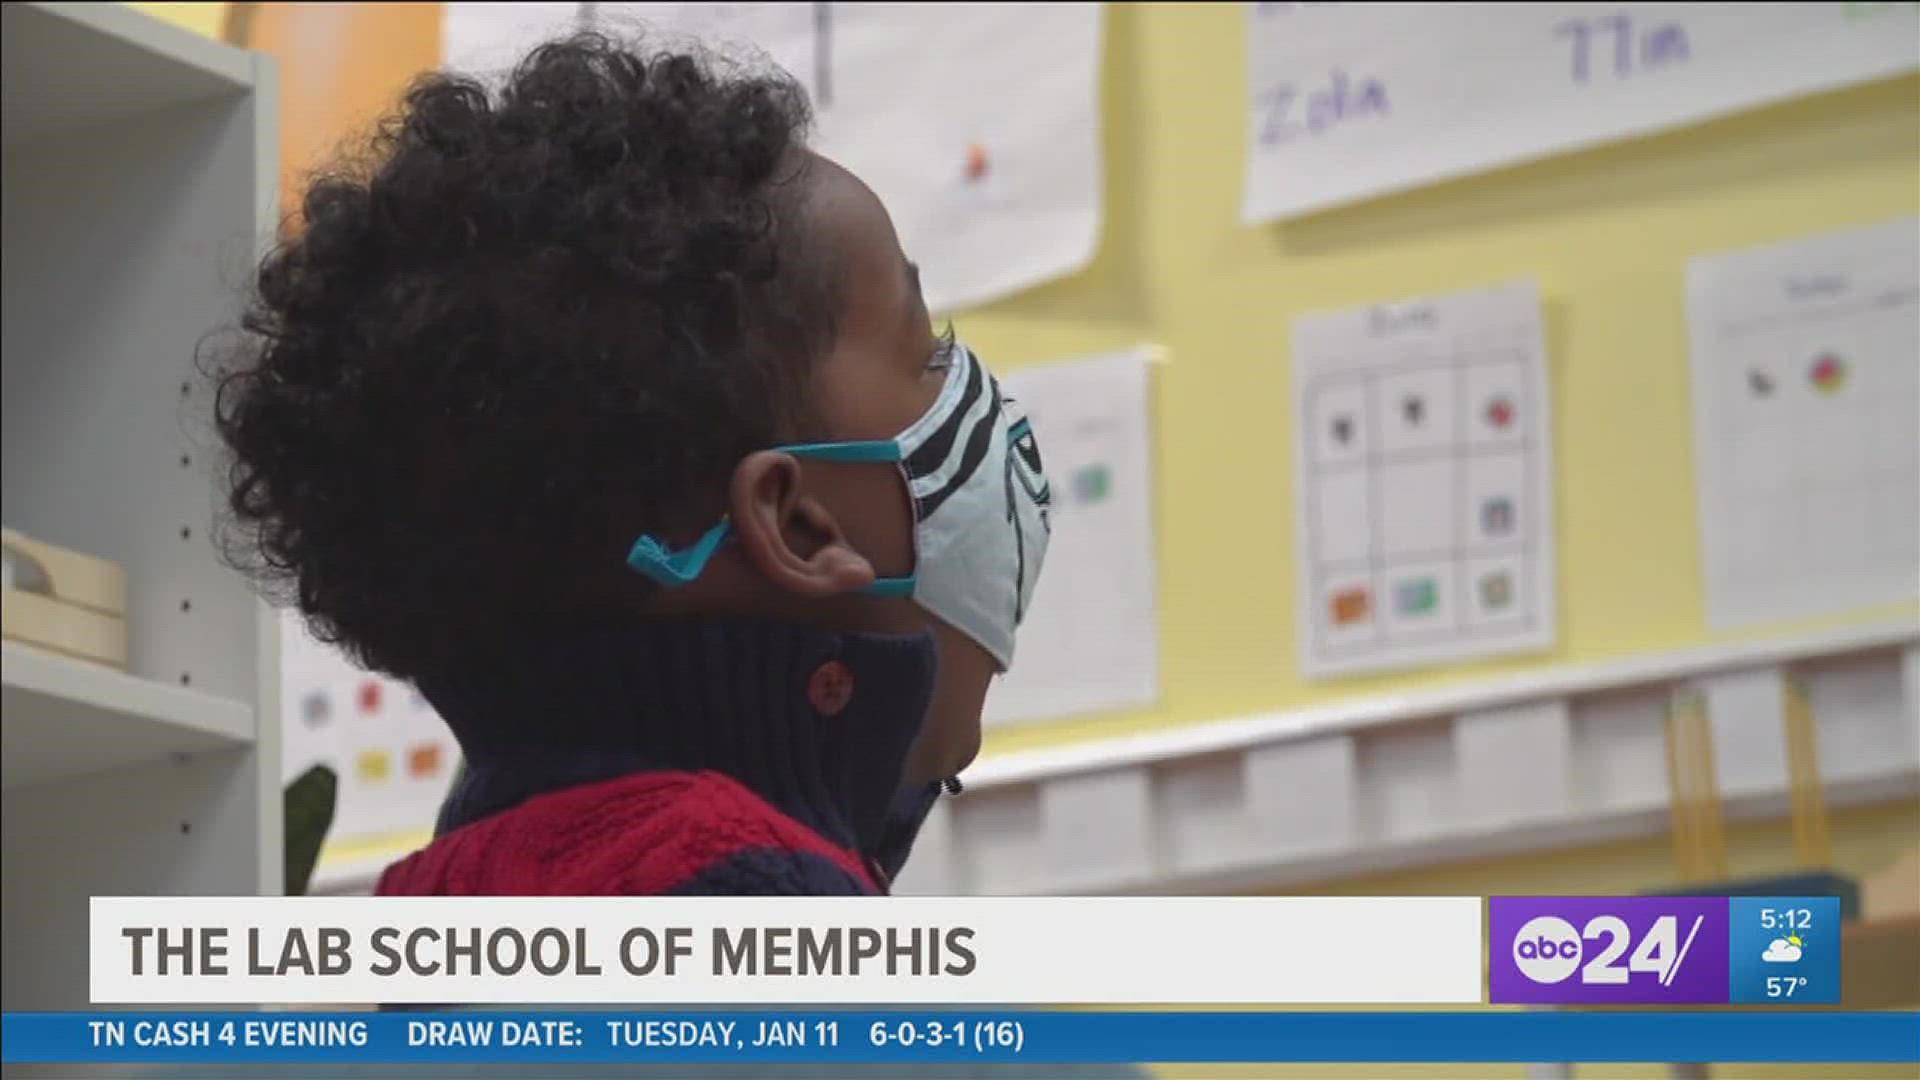 “For me, education is about learning versus knowing. I don’t think there’s an endpoint or an arrival,” said Lab School of Memphis founder Coi Morrison.